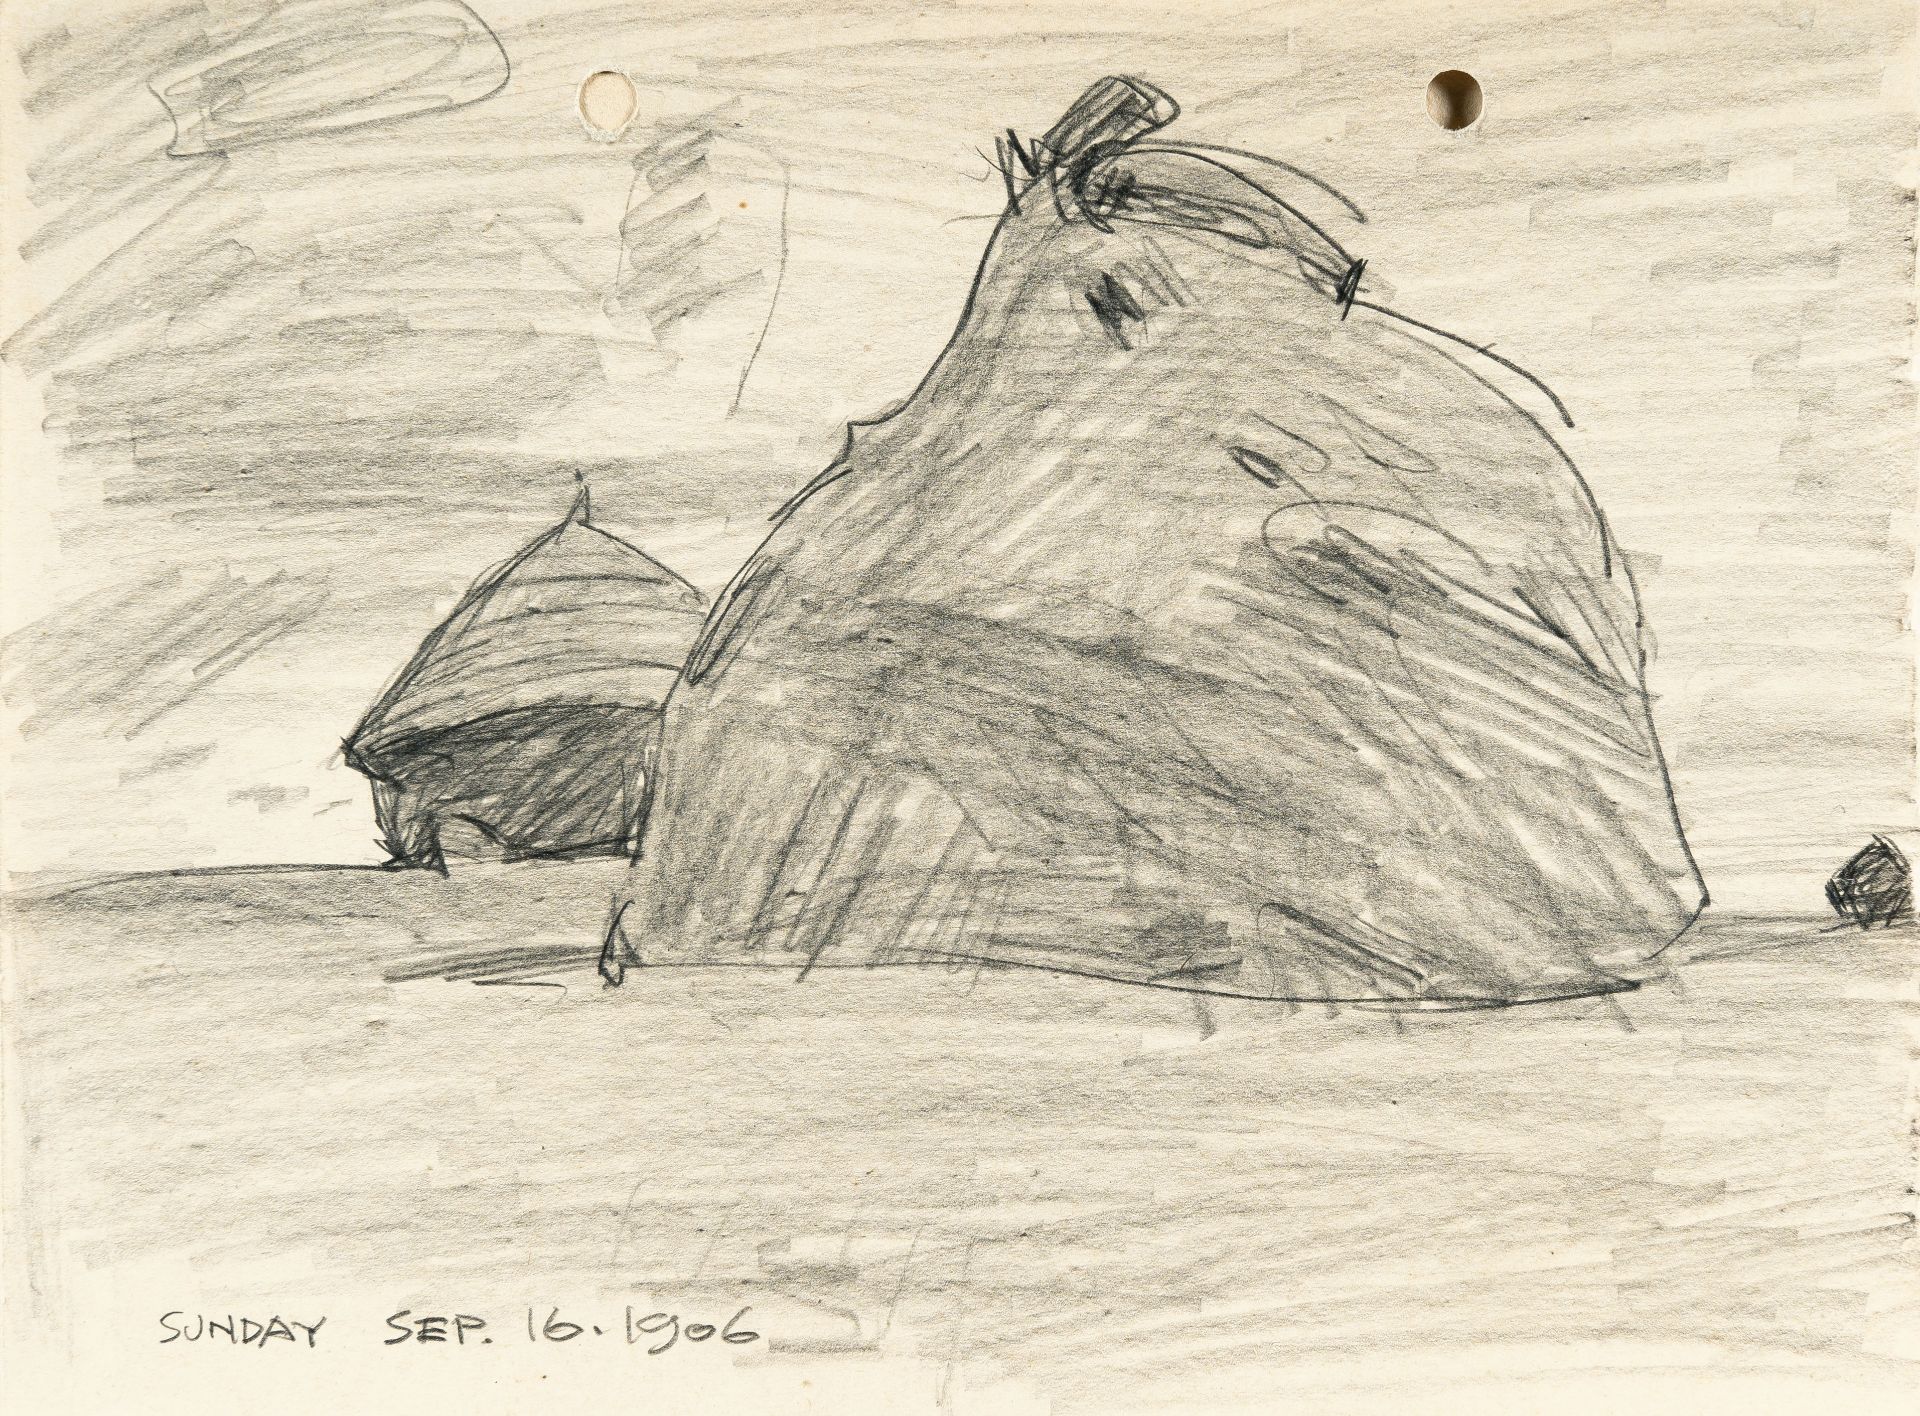 Lyonel Feininger, Haystack.Pencil on smooth drawing paper. 1906. Ca. 13.5 x 18 cm. Inscribed / dated